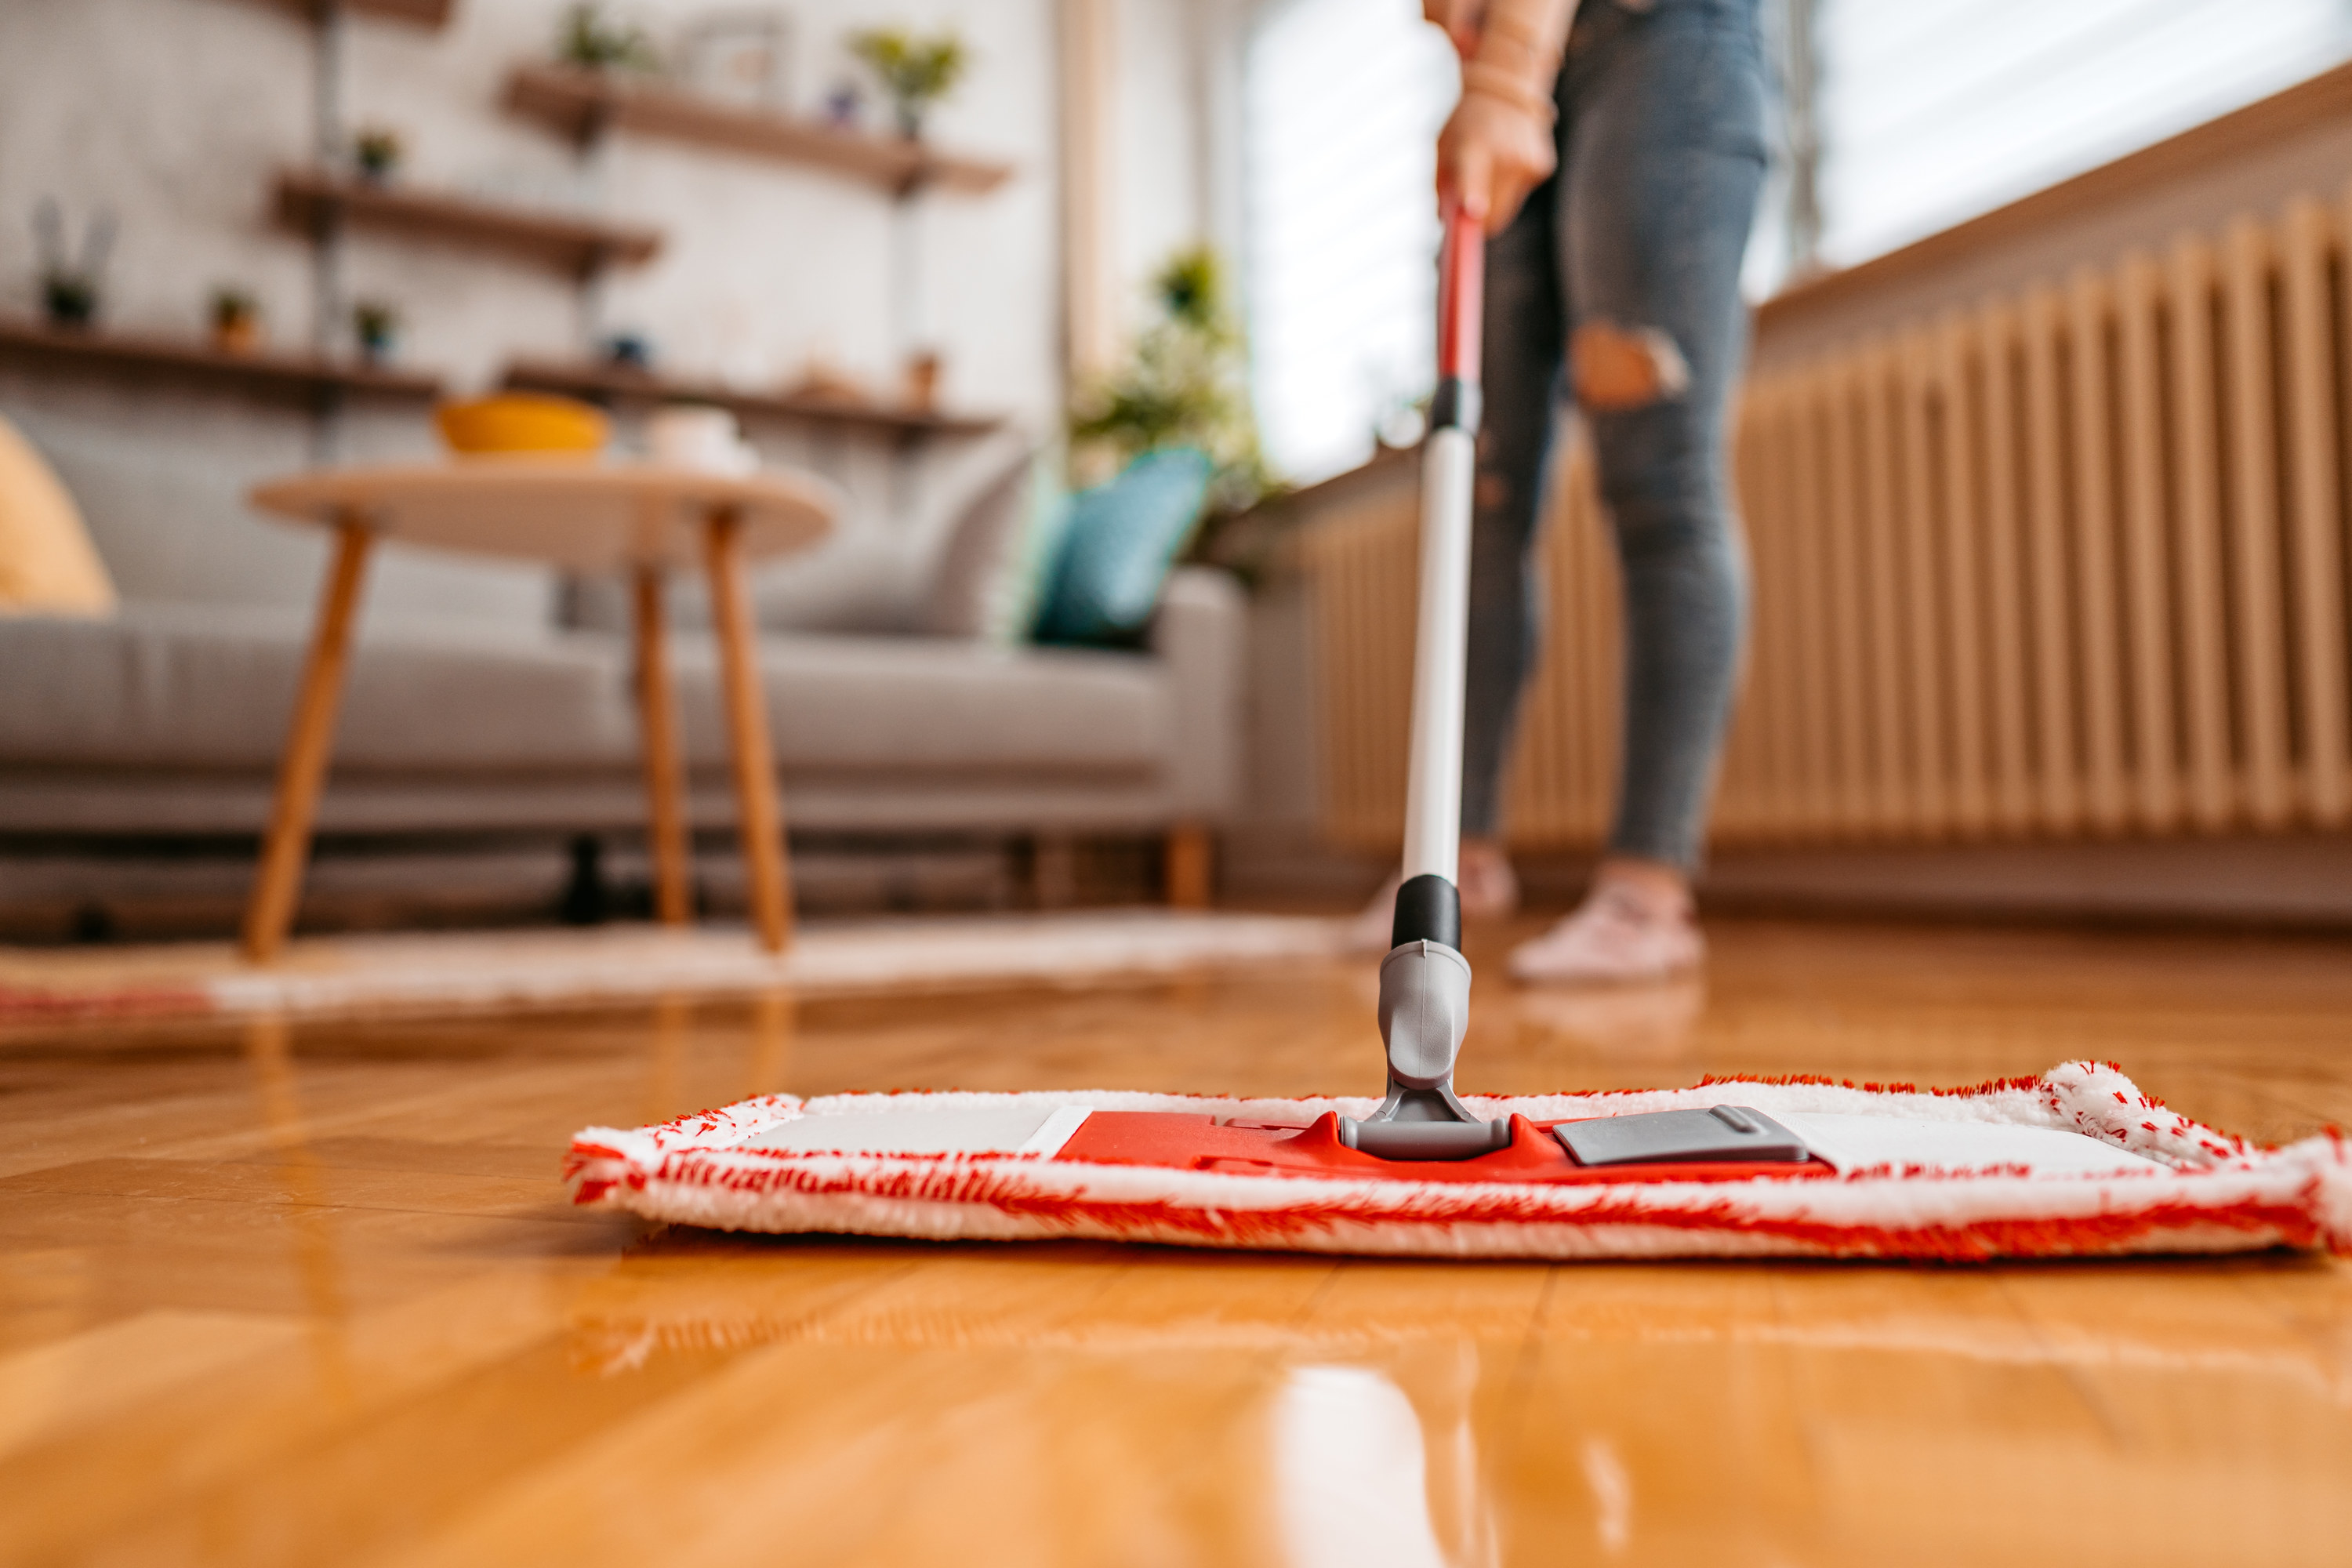 Bring Back The Shine to Your Floors: How to Easily Restore Your Hardwoods Like New